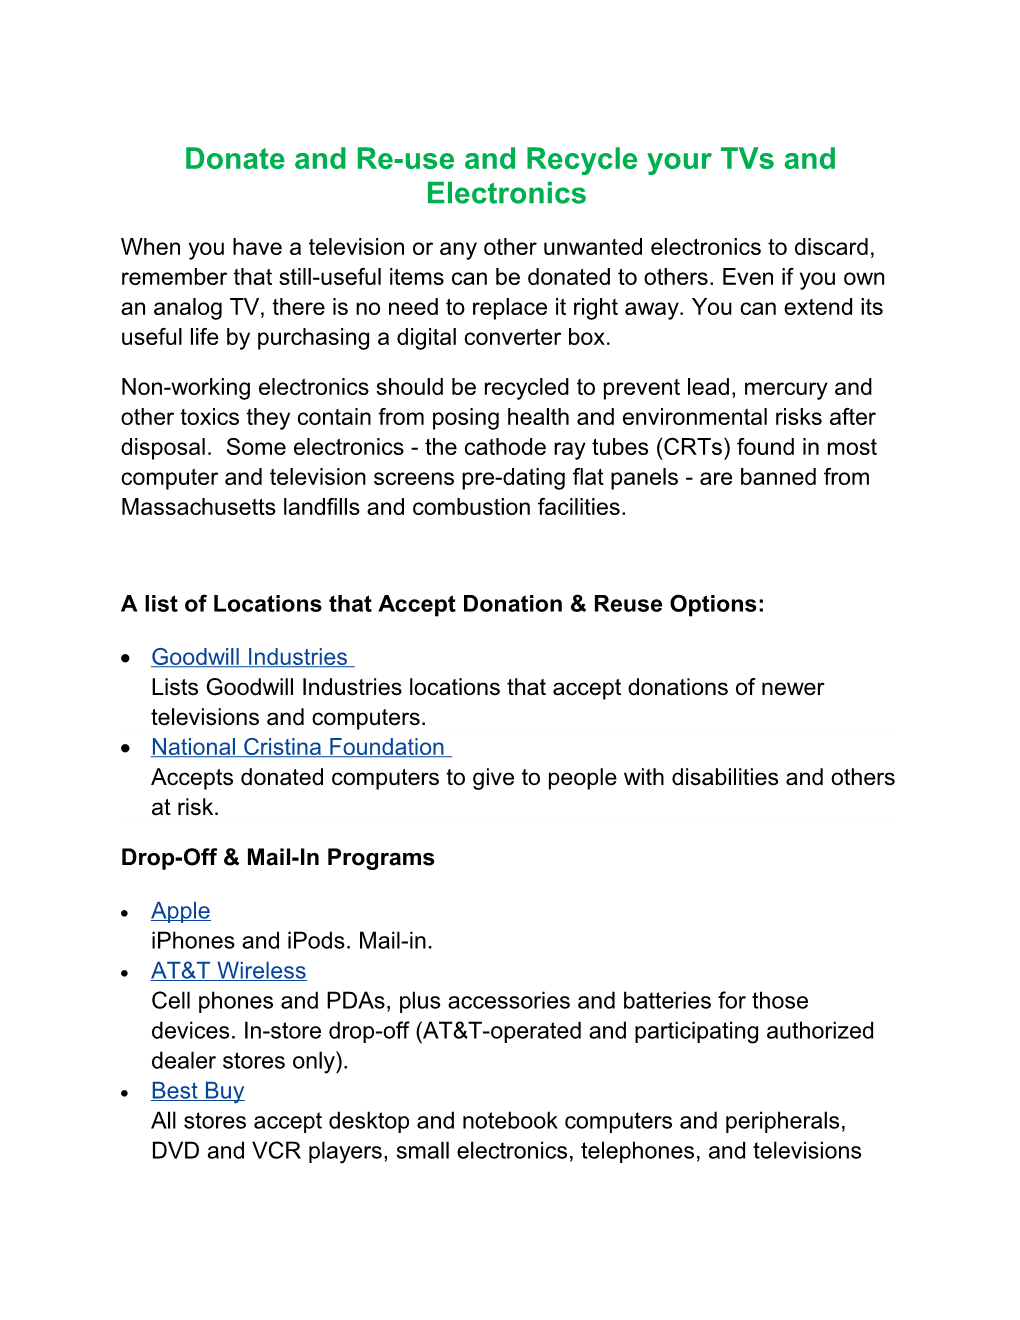 Donate and Re-Use and Recycle Your Tvs and Electronics